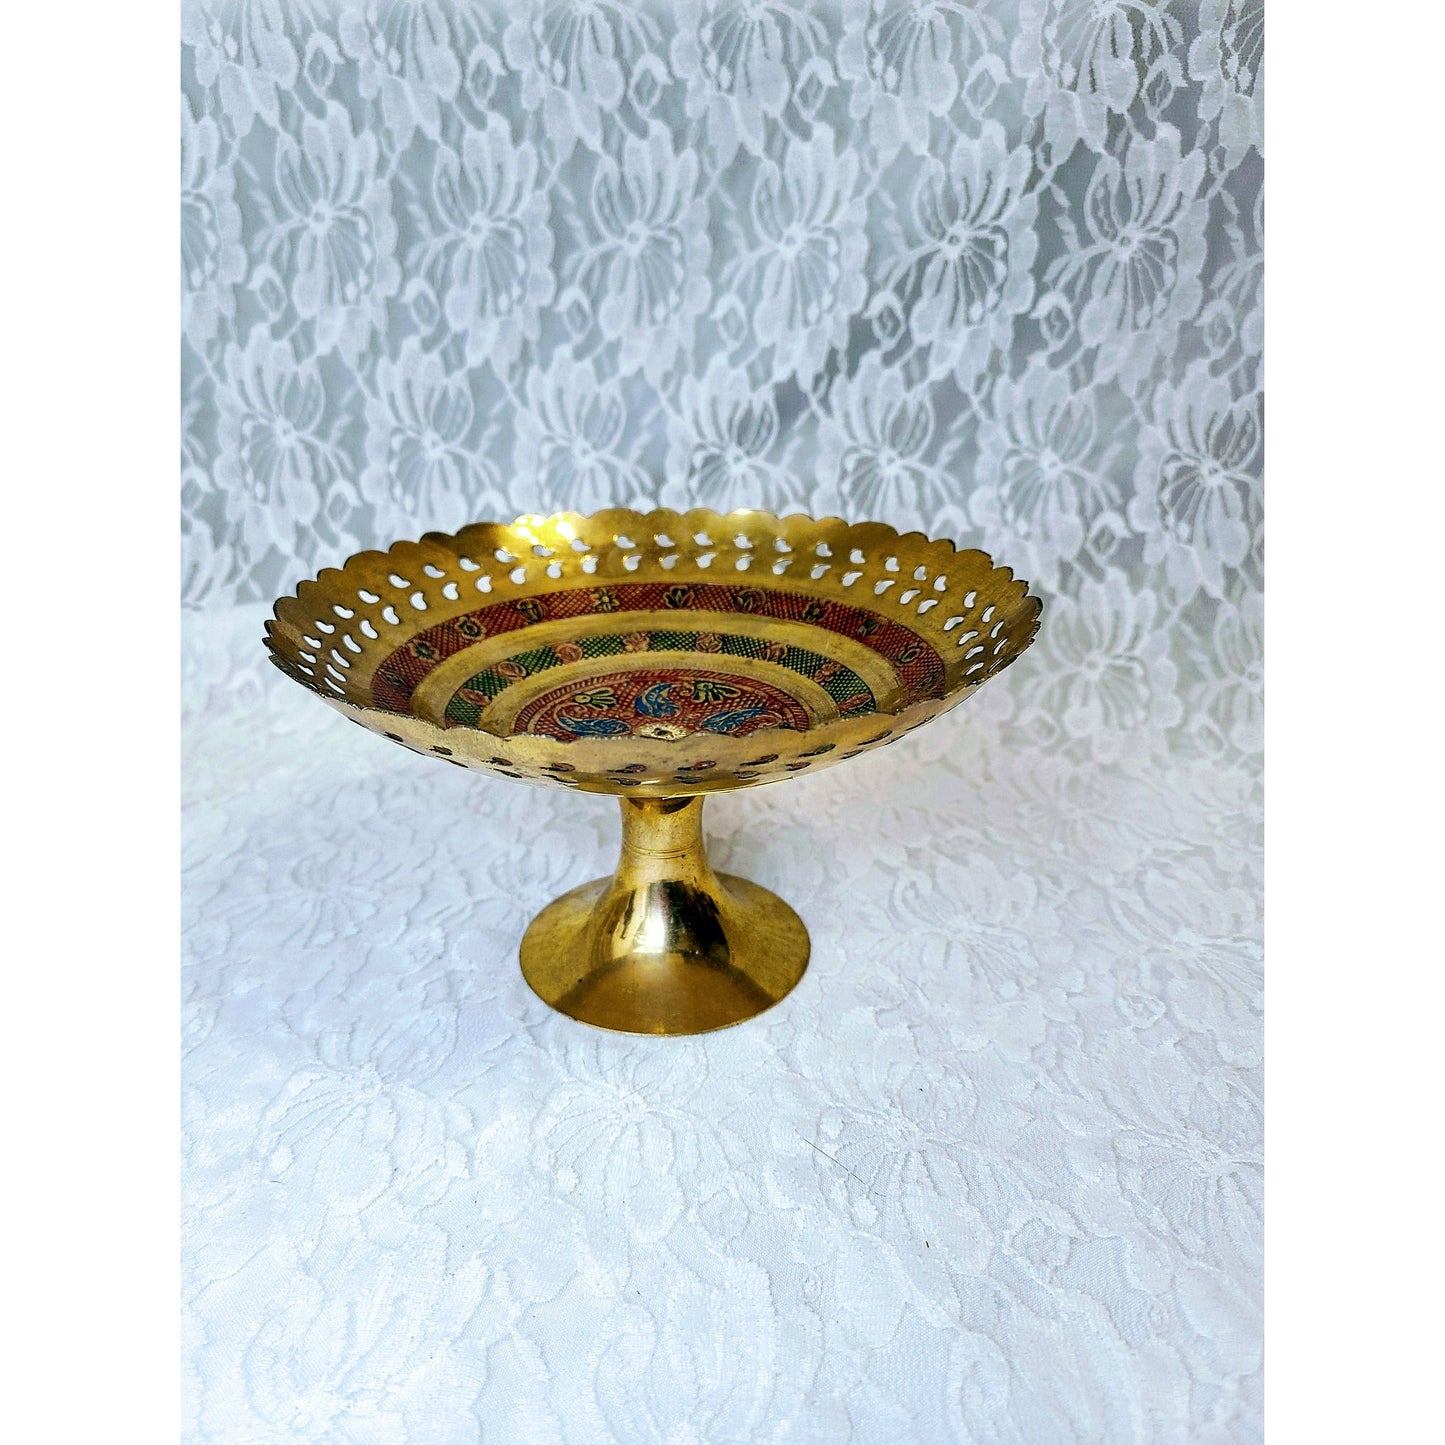 Antique India Brass Enamel Pedestal Plate Tray ~ For Altar or Crystal Display ~ 6.5" wide 3.9" Tall ~ Candies, Serving, or Display